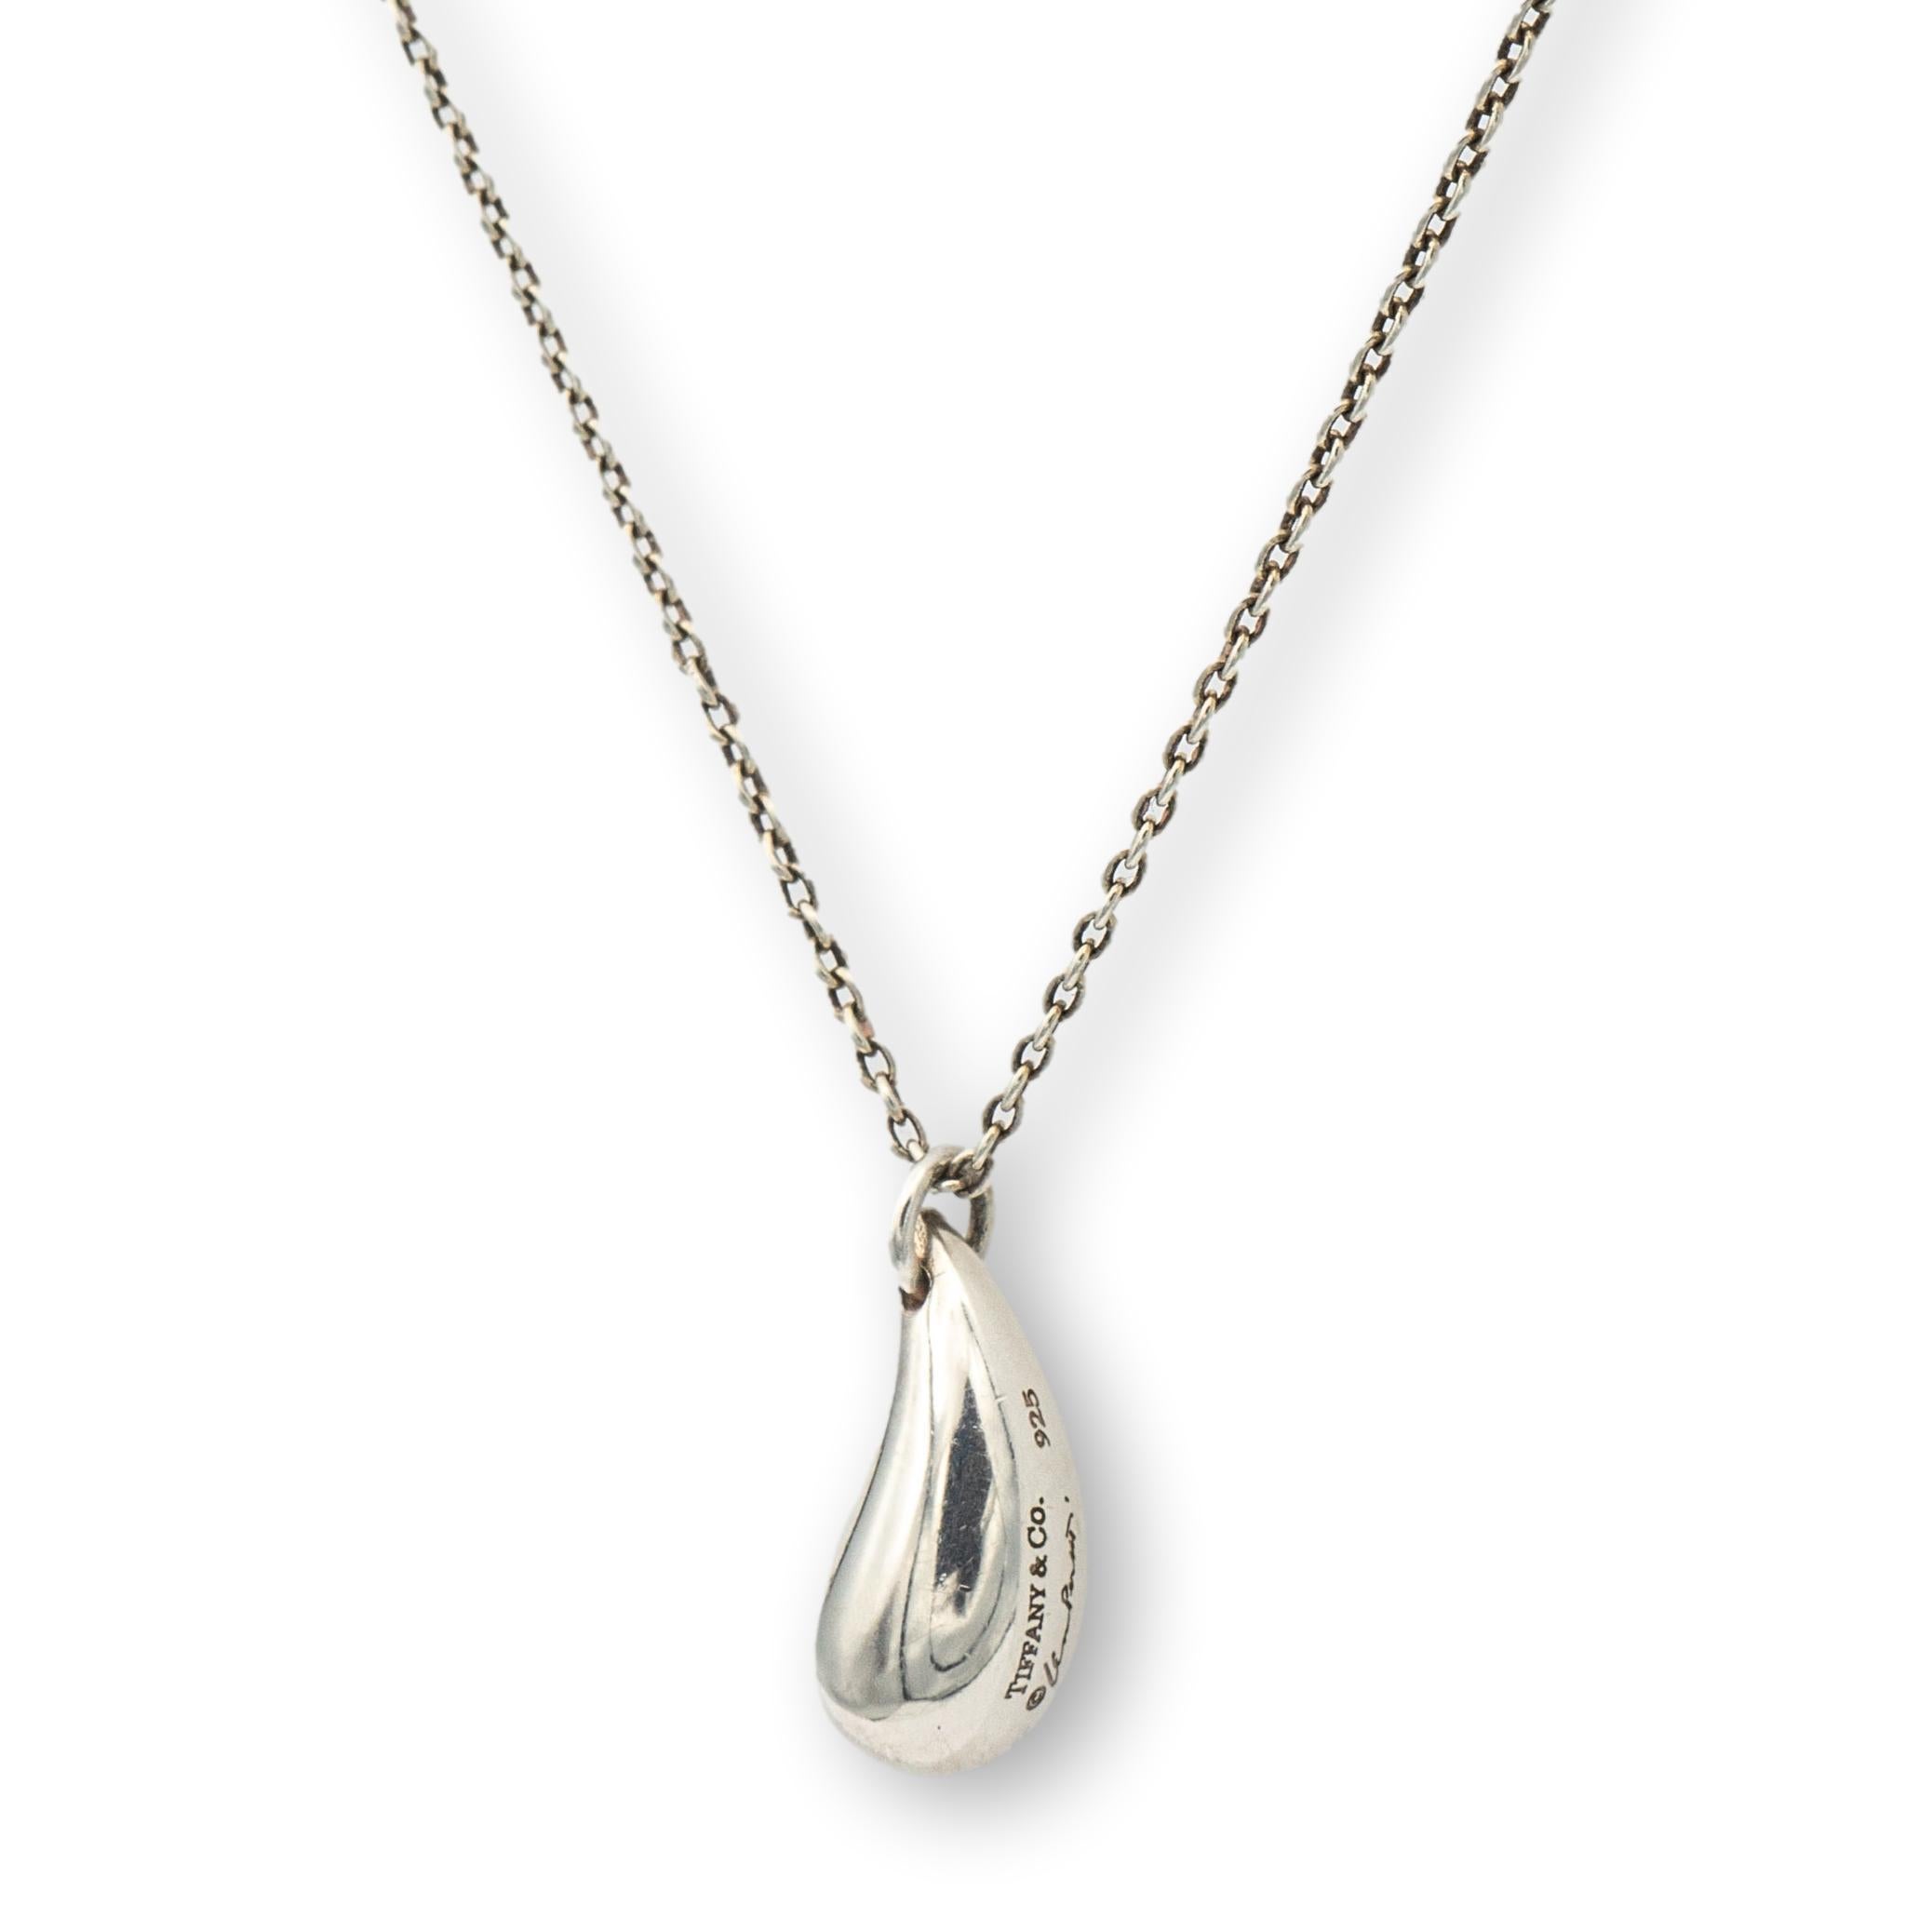 Tiffany & Co. Elsa Peretti finely crafted in sterling silver with a teardrop pendant that measures 12mm long and hangs off a link chain with spring ring closure. The chain length is 16.5